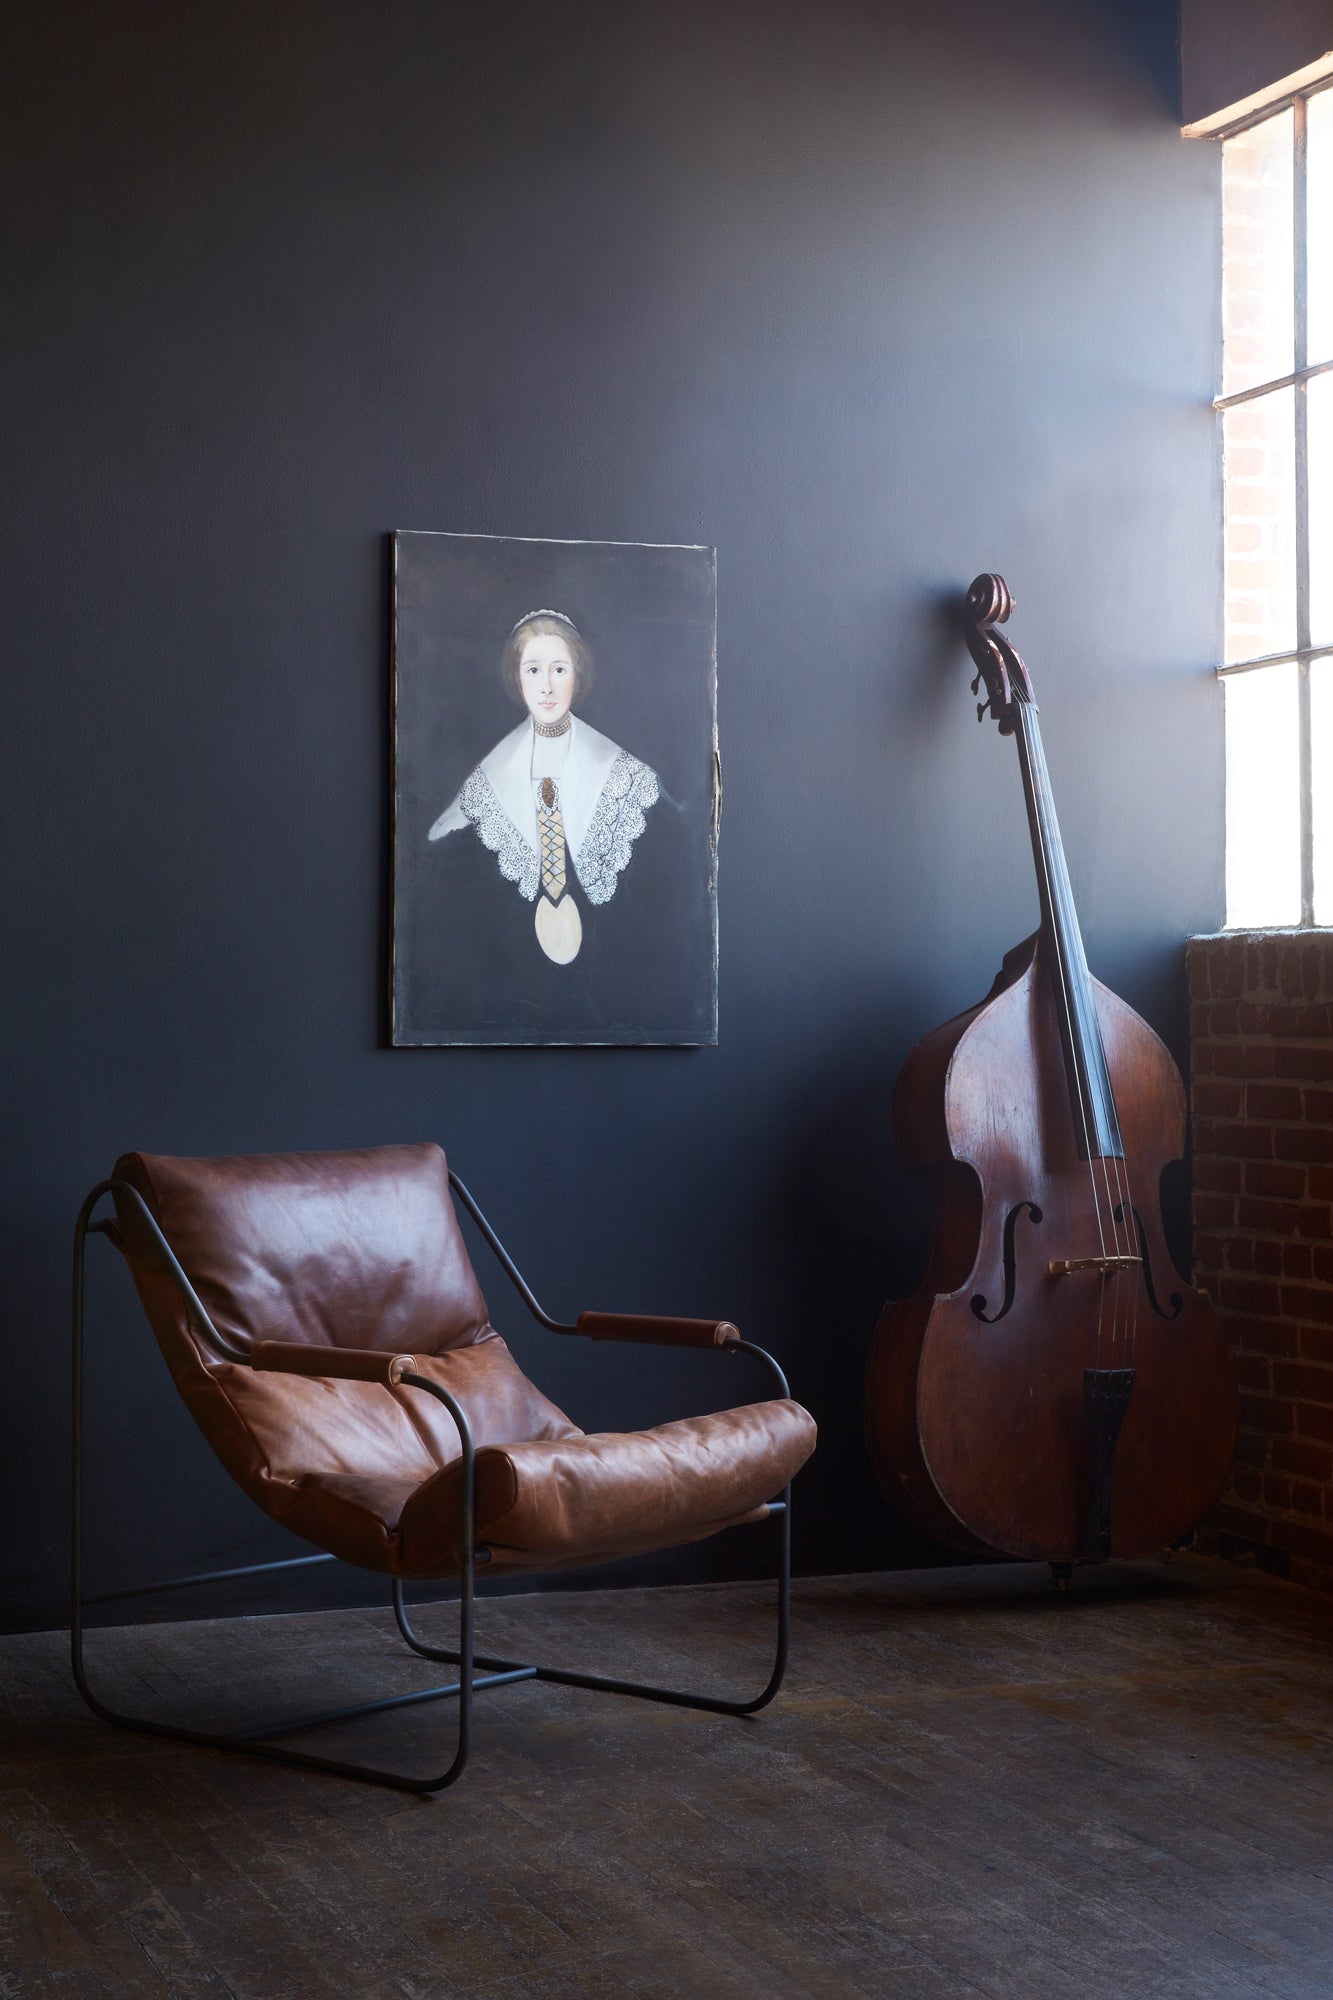  Chair in Spur Terracotta next to a violin. In the background is a dark room with a black painting hanging. Photographed in Spur Terracotta. 